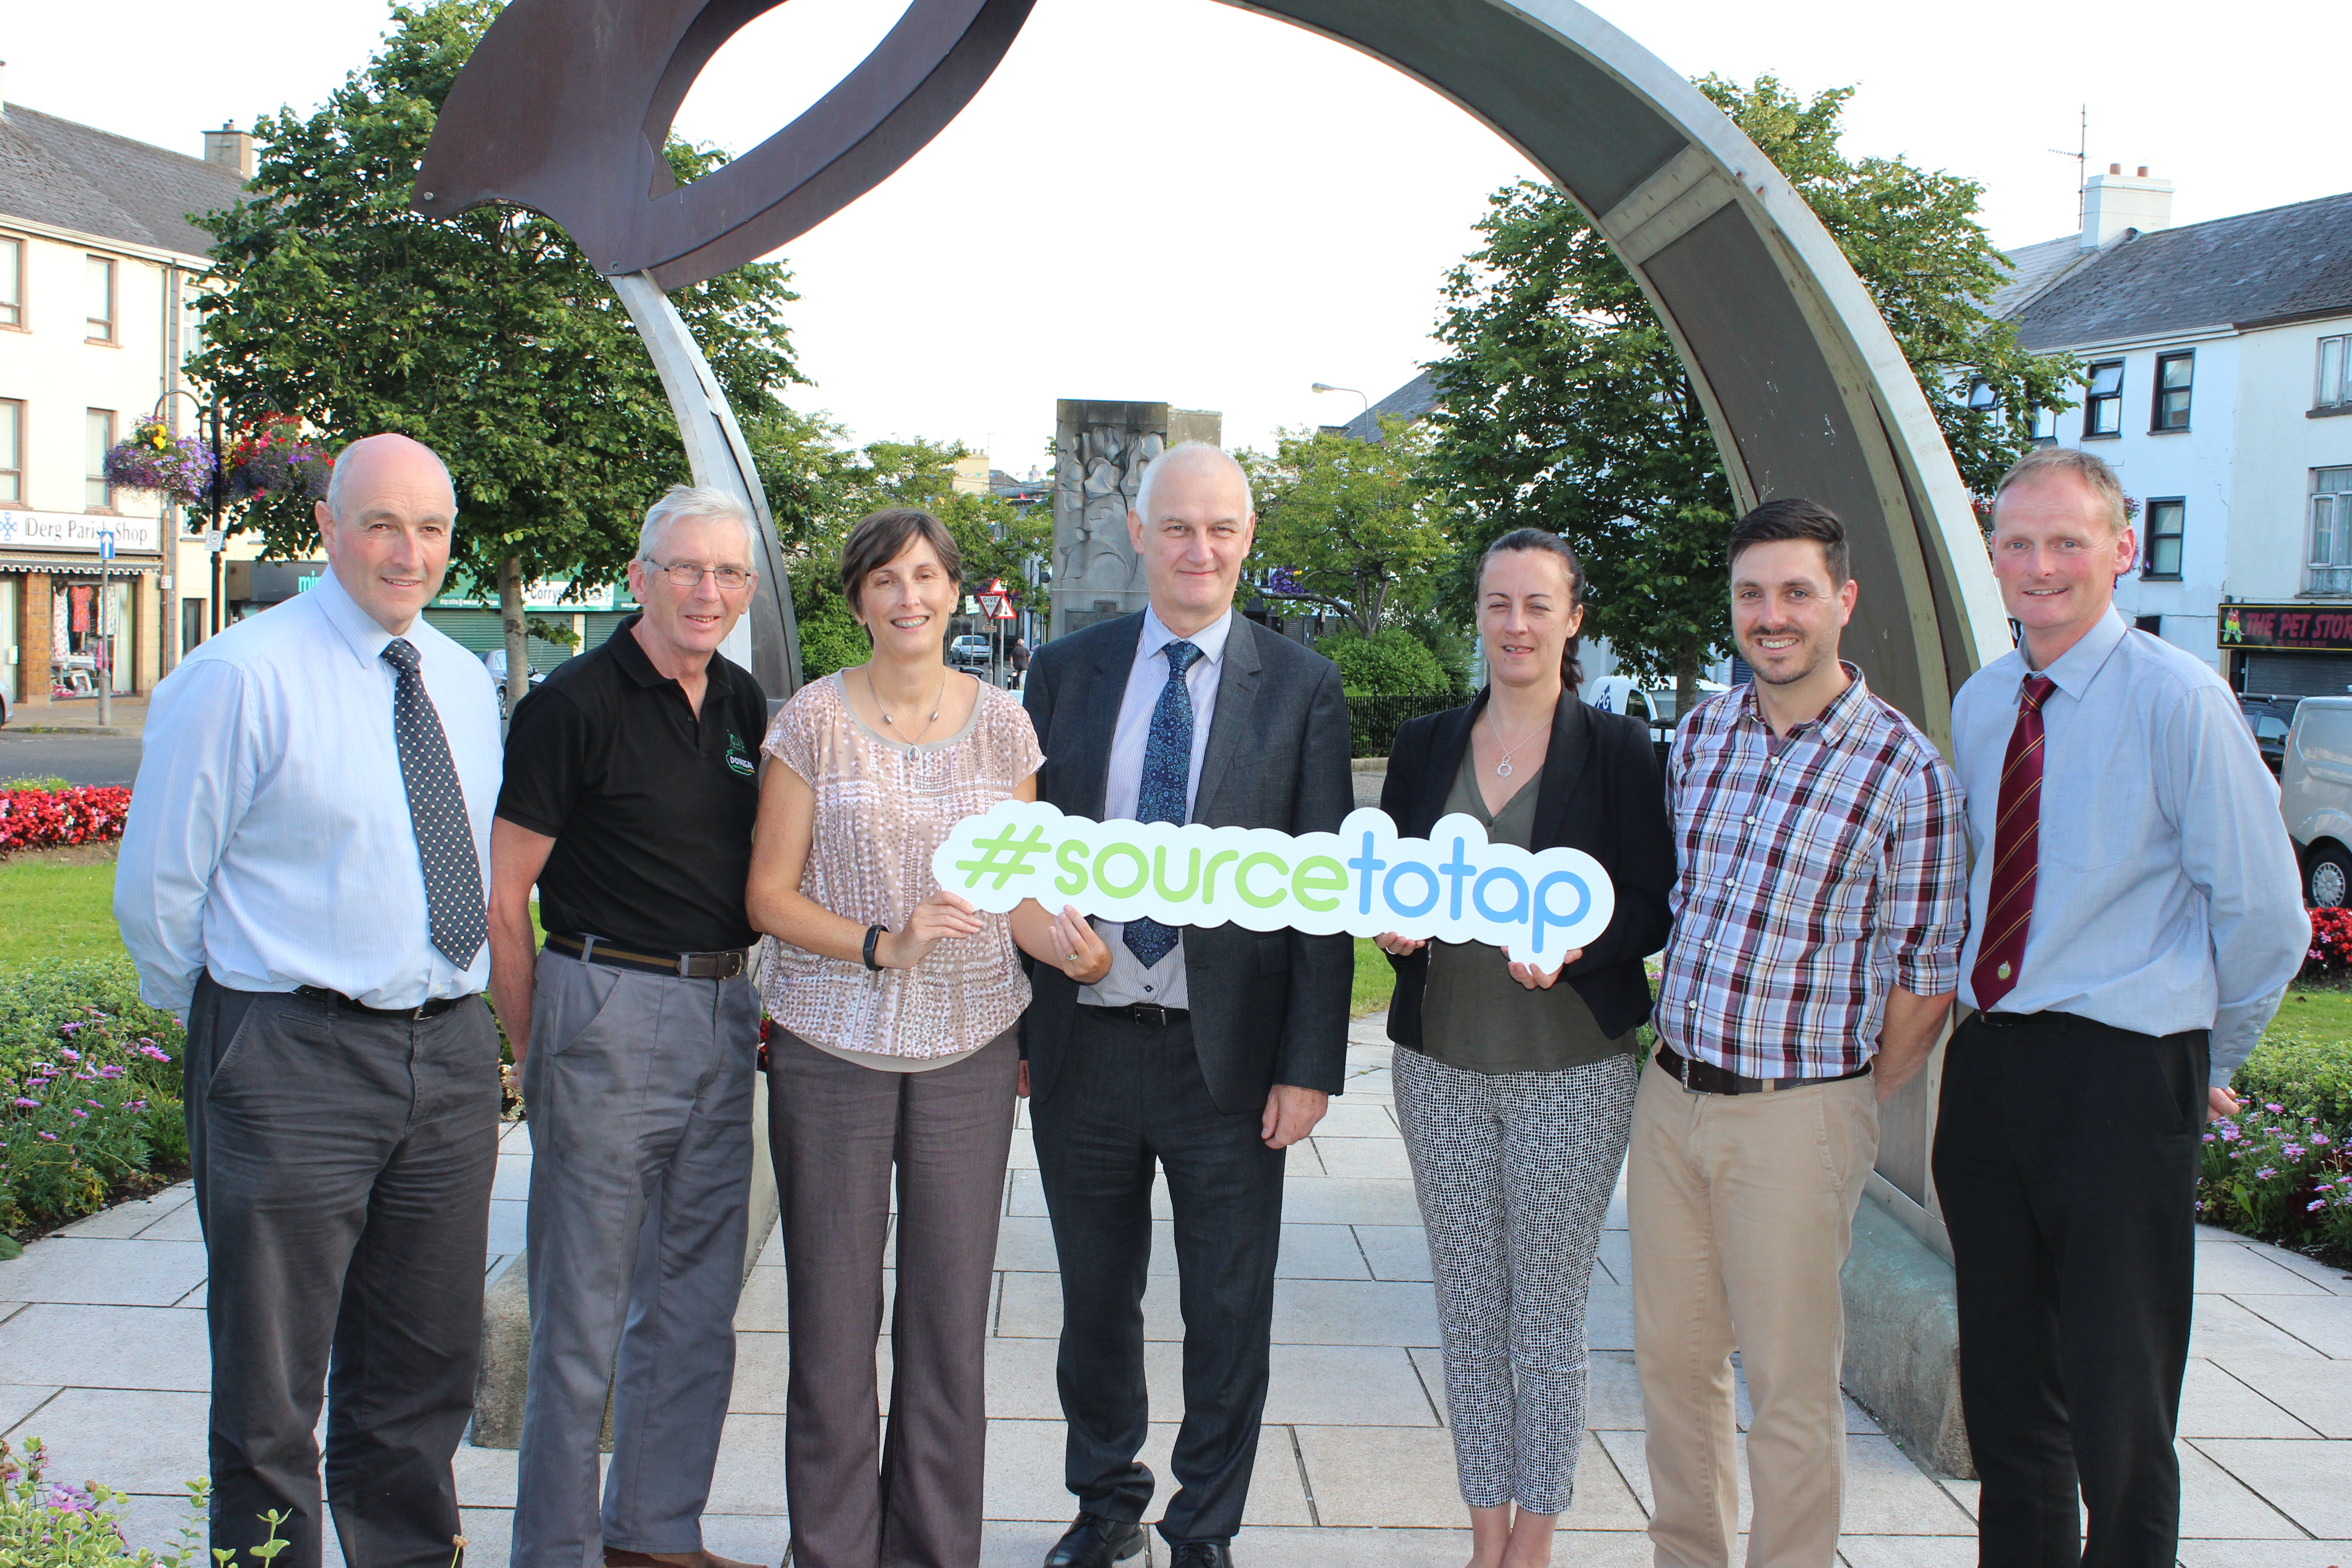 Robin Bolton, CAFRE, Michael Chance, IFA (Irish Farmers’ Association) Donegal County Chairman, Diane Foster, Source to Tap Project Manager, Paul Harper, NI Water Director of Asset Delivery, Trudy Higgins, Irish Water, Environmental Strategy Lead, Mark Horton The Rivers Trust and David Brown Deputy President UFU.